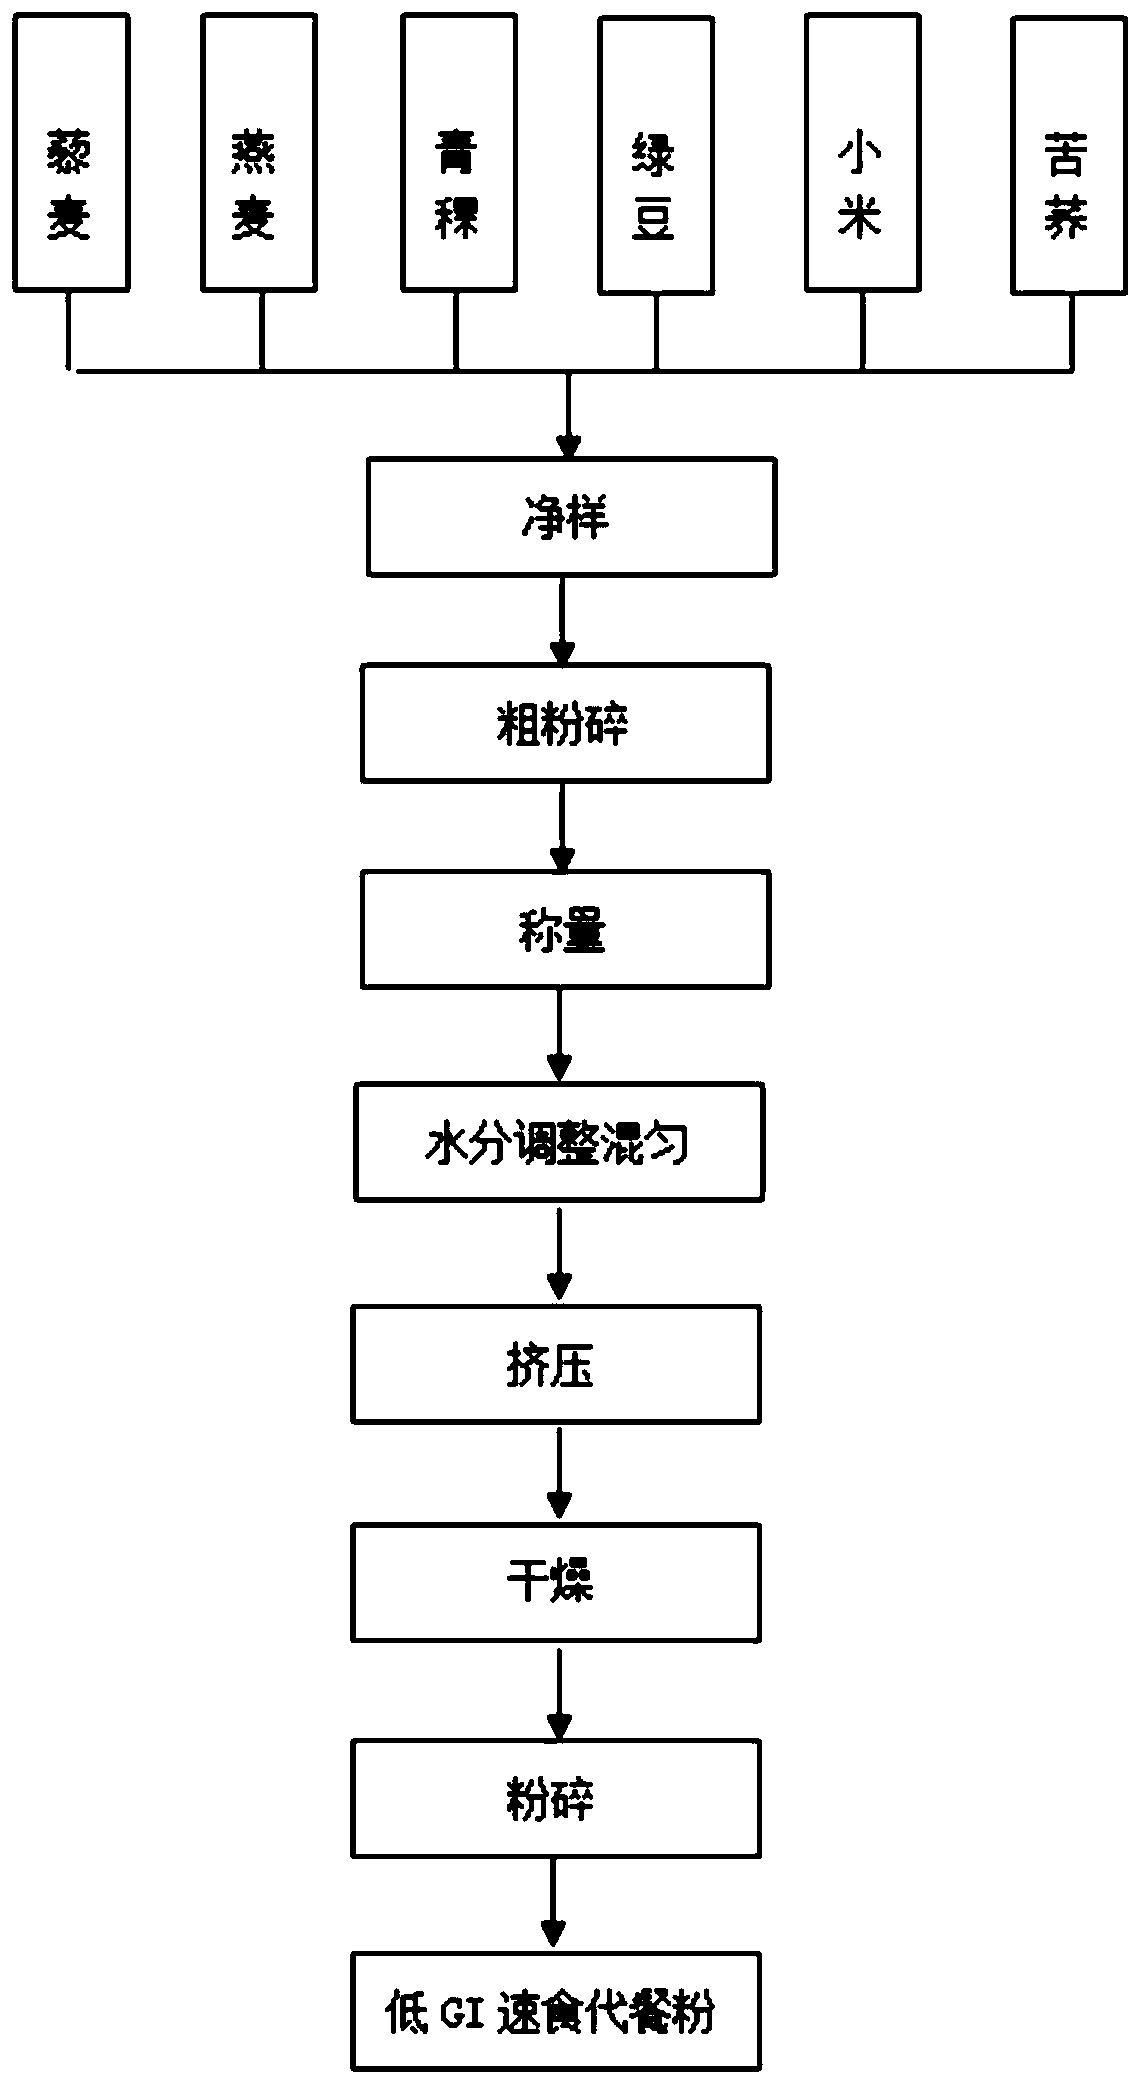 Low-GI (glycemic index) multi-grain instant meal replacement powder and preparation method thereof